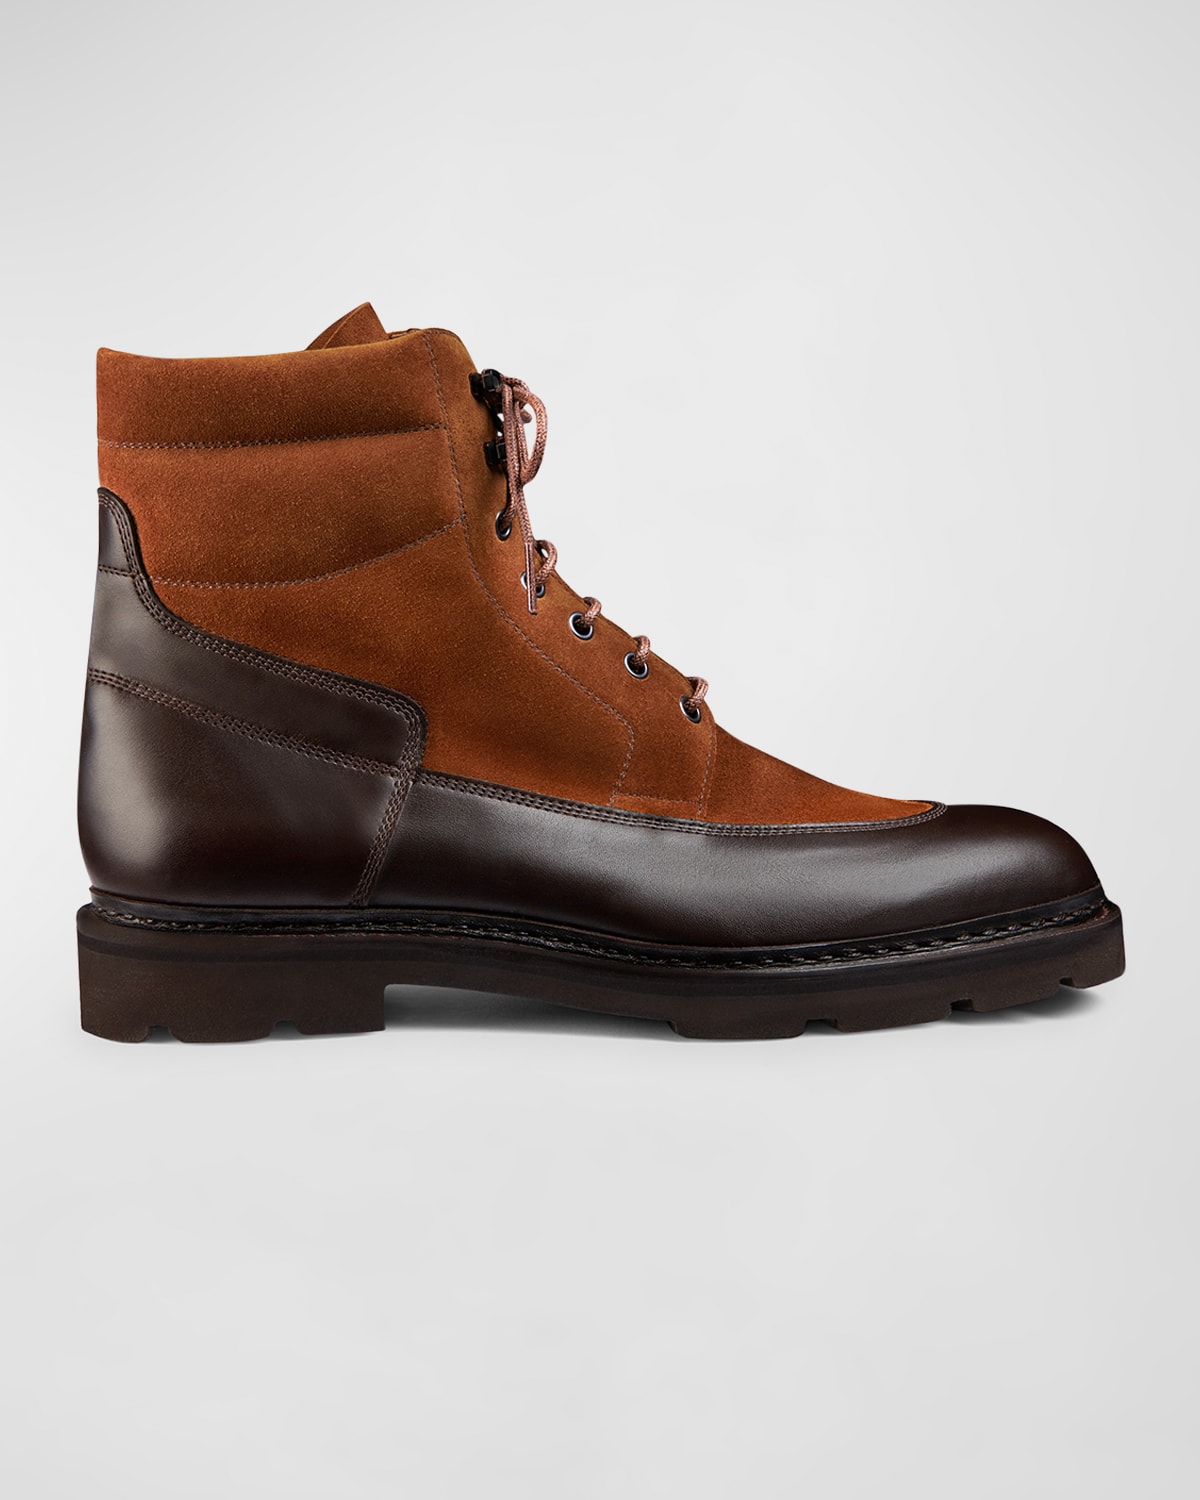 JOHN LOBB MEN'S PEAK SUEDE AND LEATHER LACE-UP BOOTS